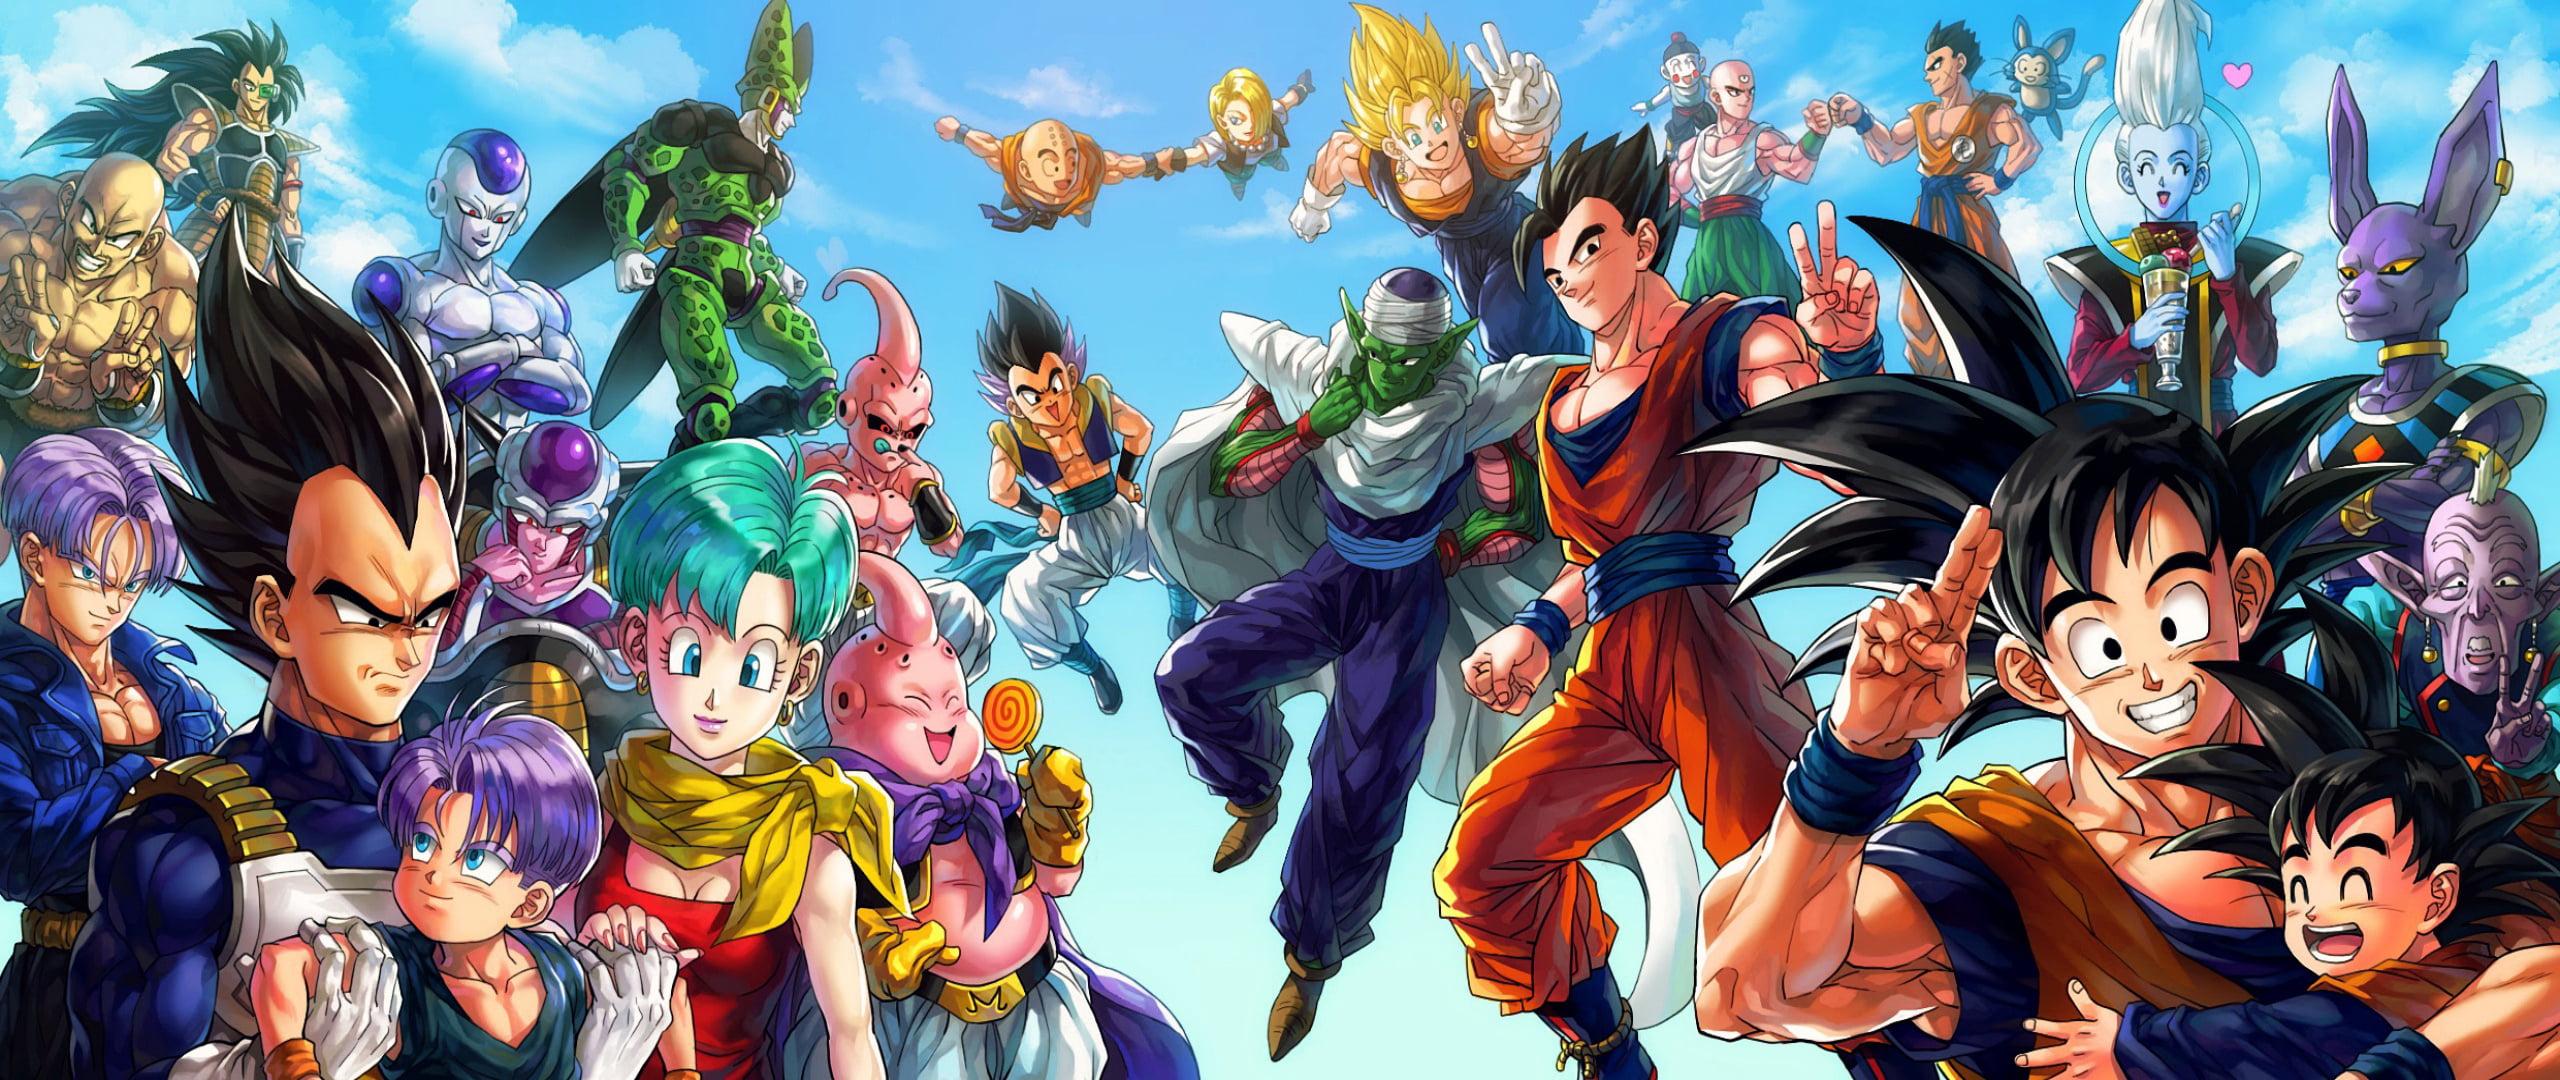 What are some great dragon ball z or super wallpapers? - Quora